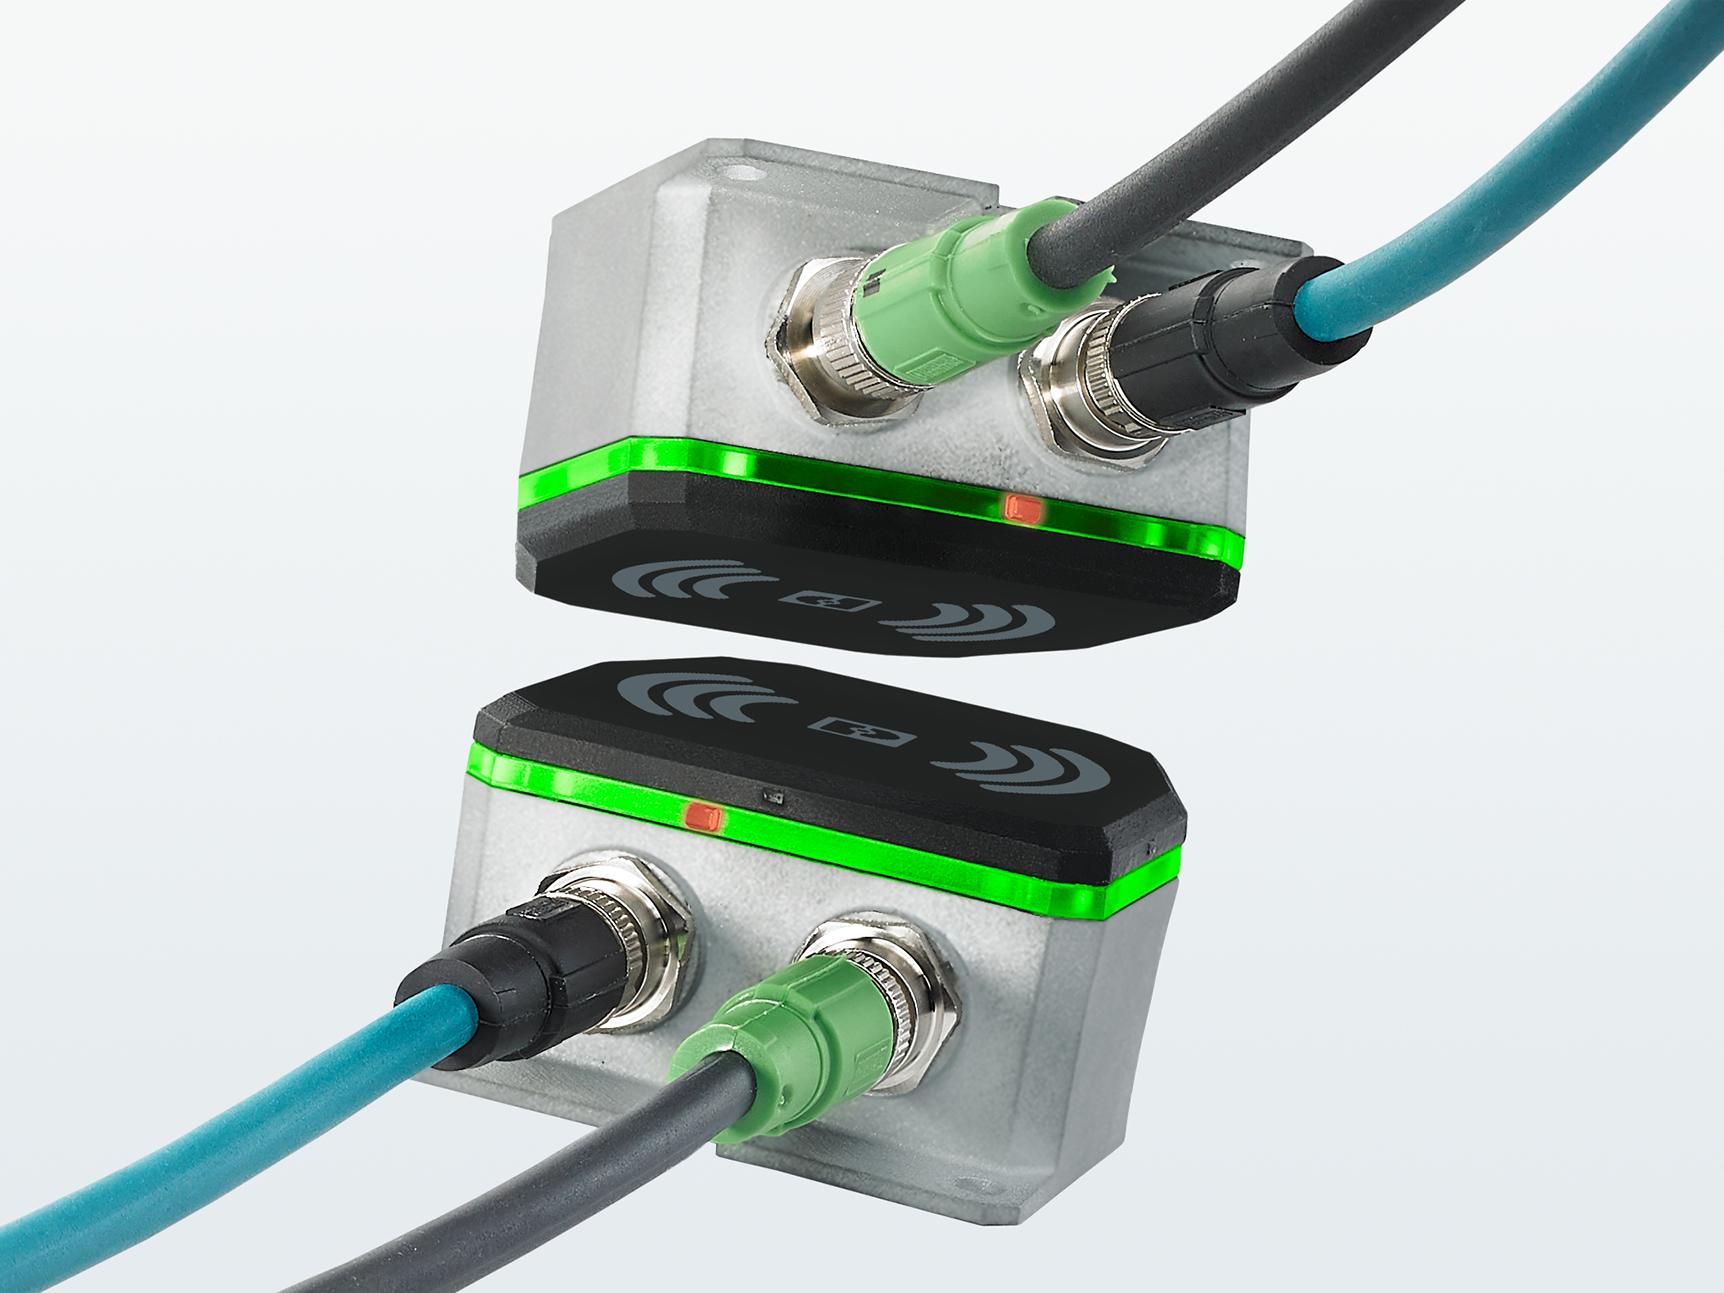 NearFi couplers for contactless power and data transmission